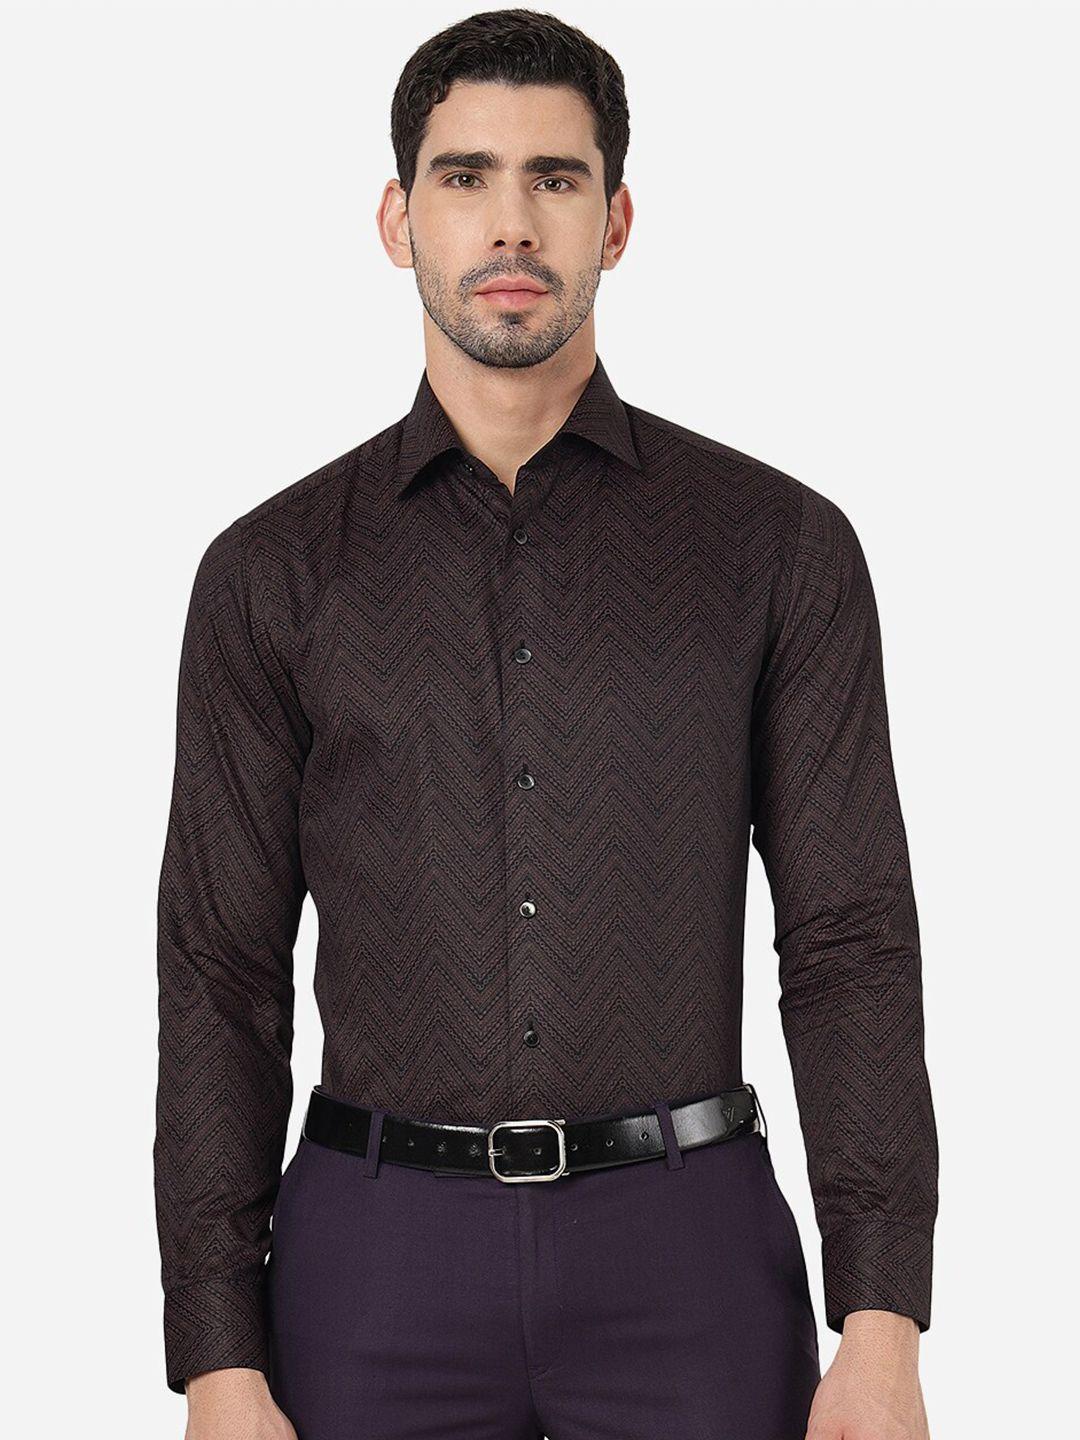 wyre slim fit geometric printed pure cotton party shirt